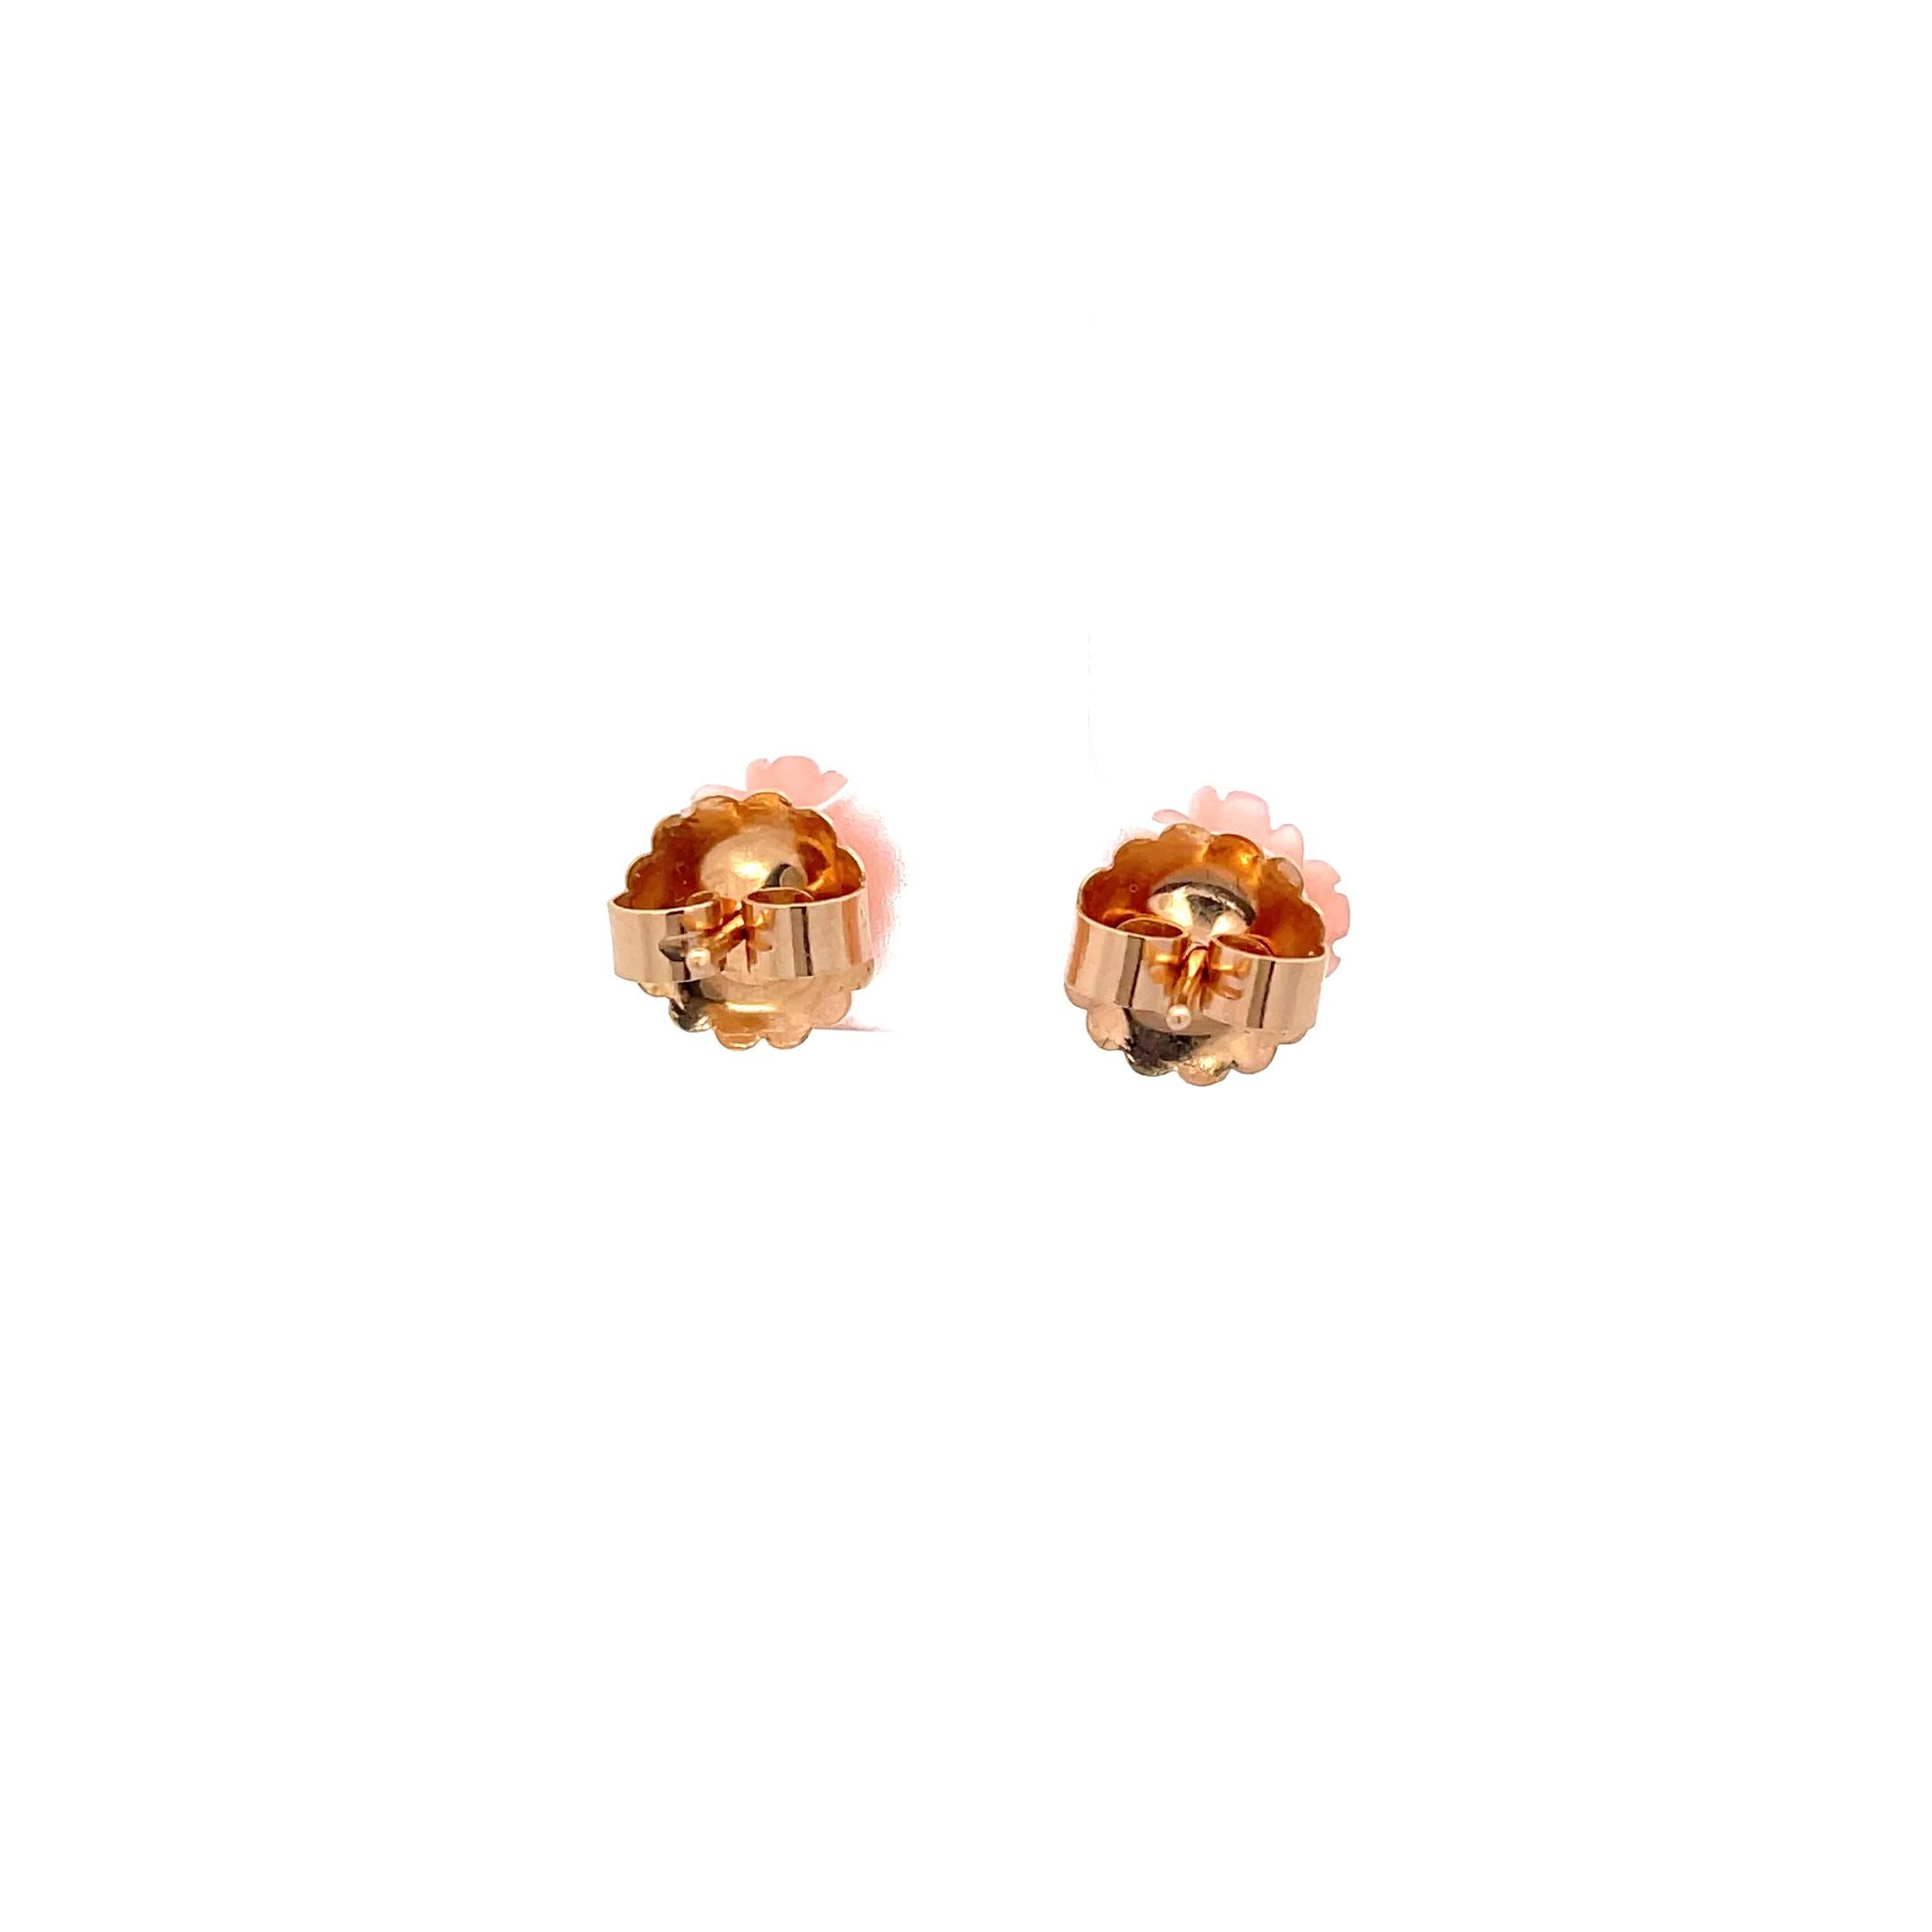 Irene Neuwirth Pink Opal Akoya Pearl Earrings 18k Rose Gold In Excellent Condition For Sale In Dallas, TX